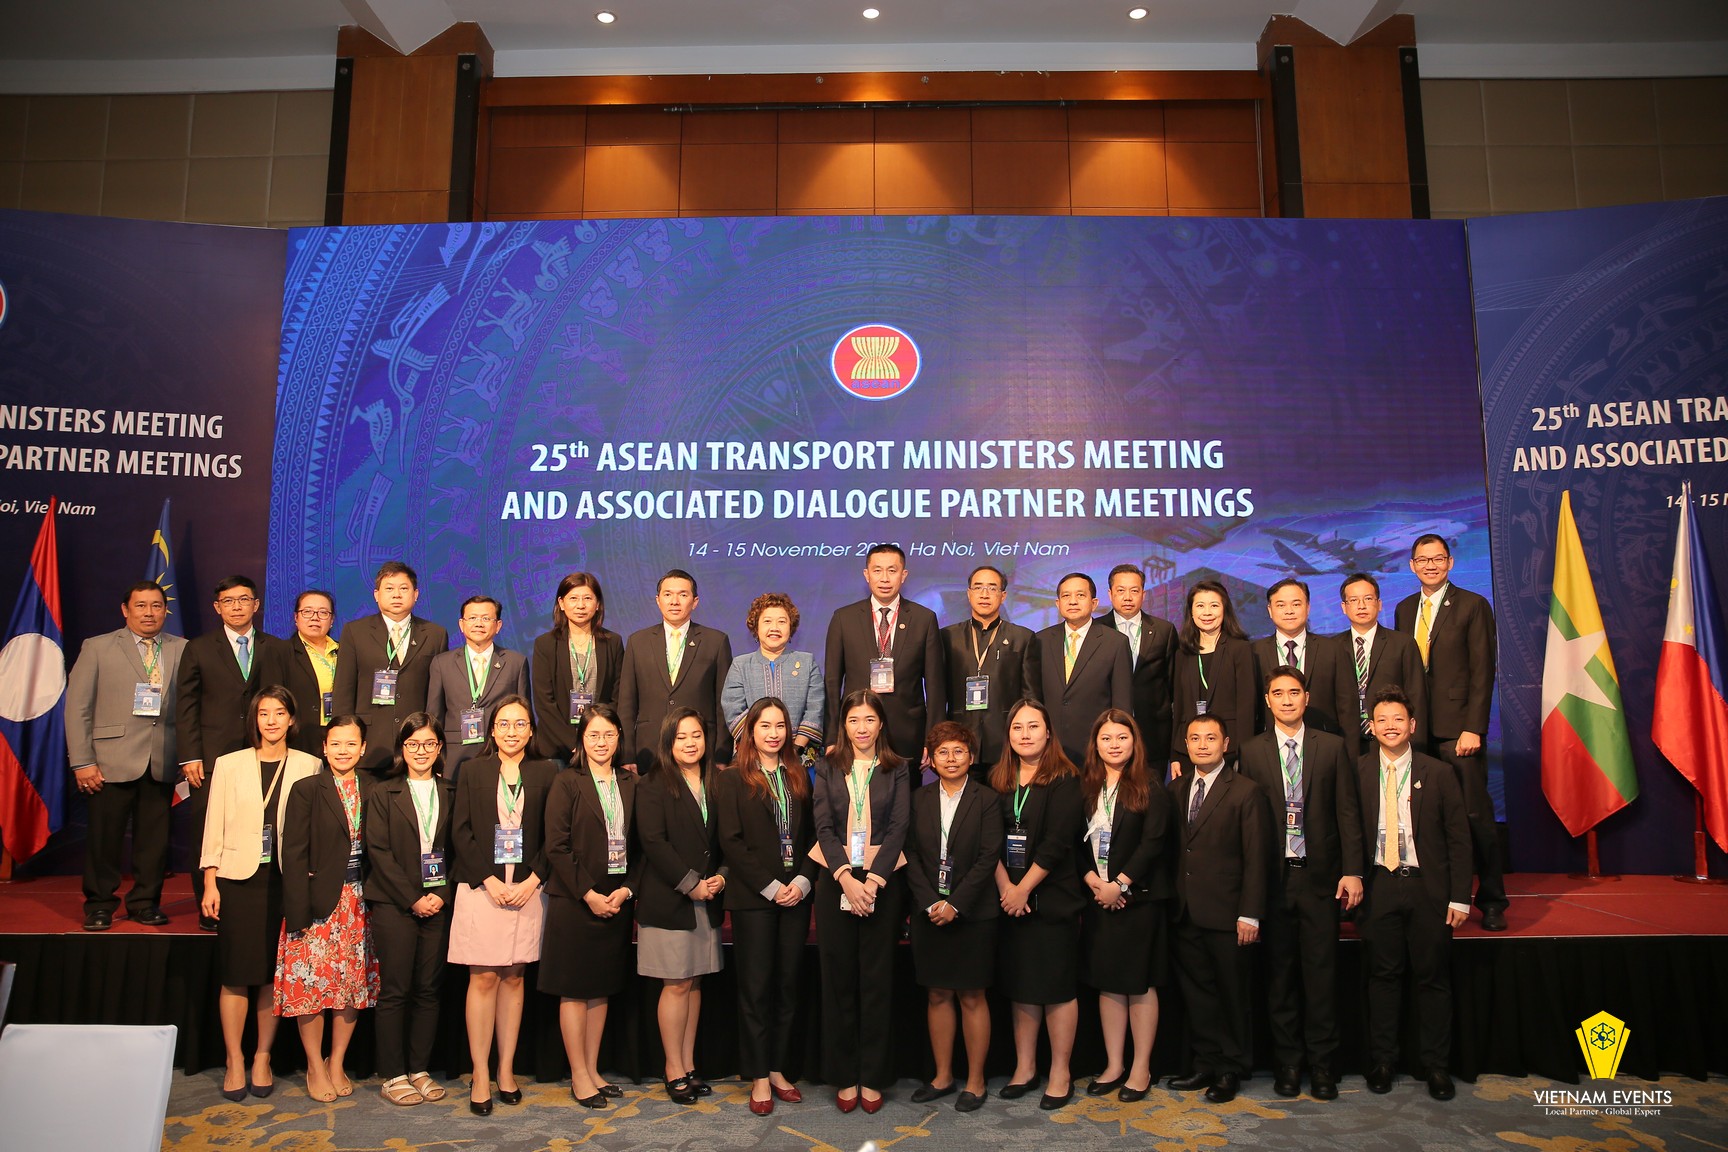 The 25th Asean Transport Ministers Meeting 